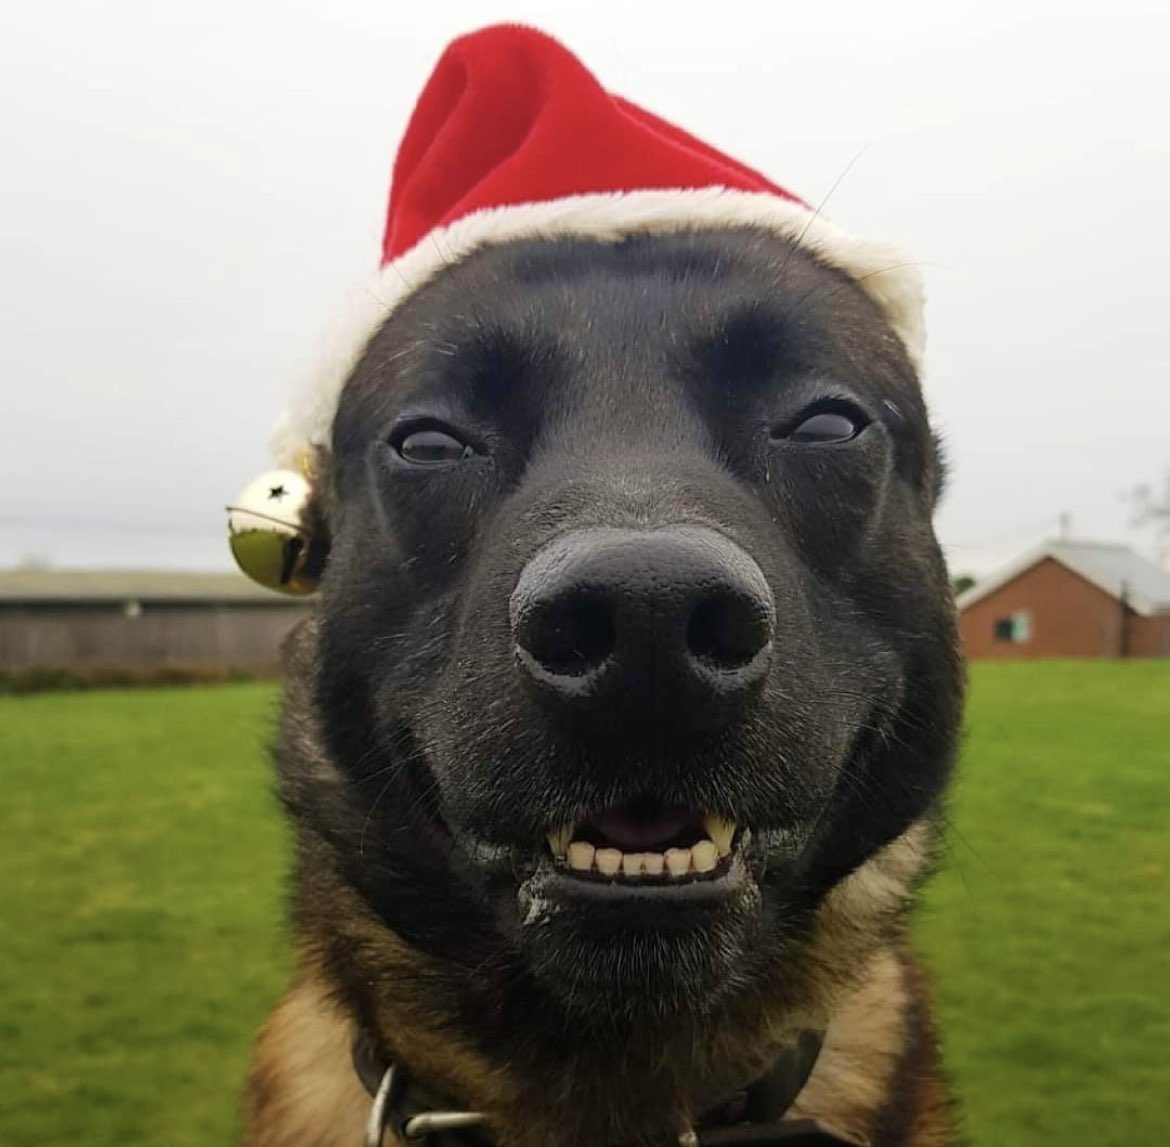 🎅 Merry Christmas from the Military Working Dogs at DATR.

#DATR #MerryChristmas #K9 #MilitaryWorkingDogs #DogsOfTwitter